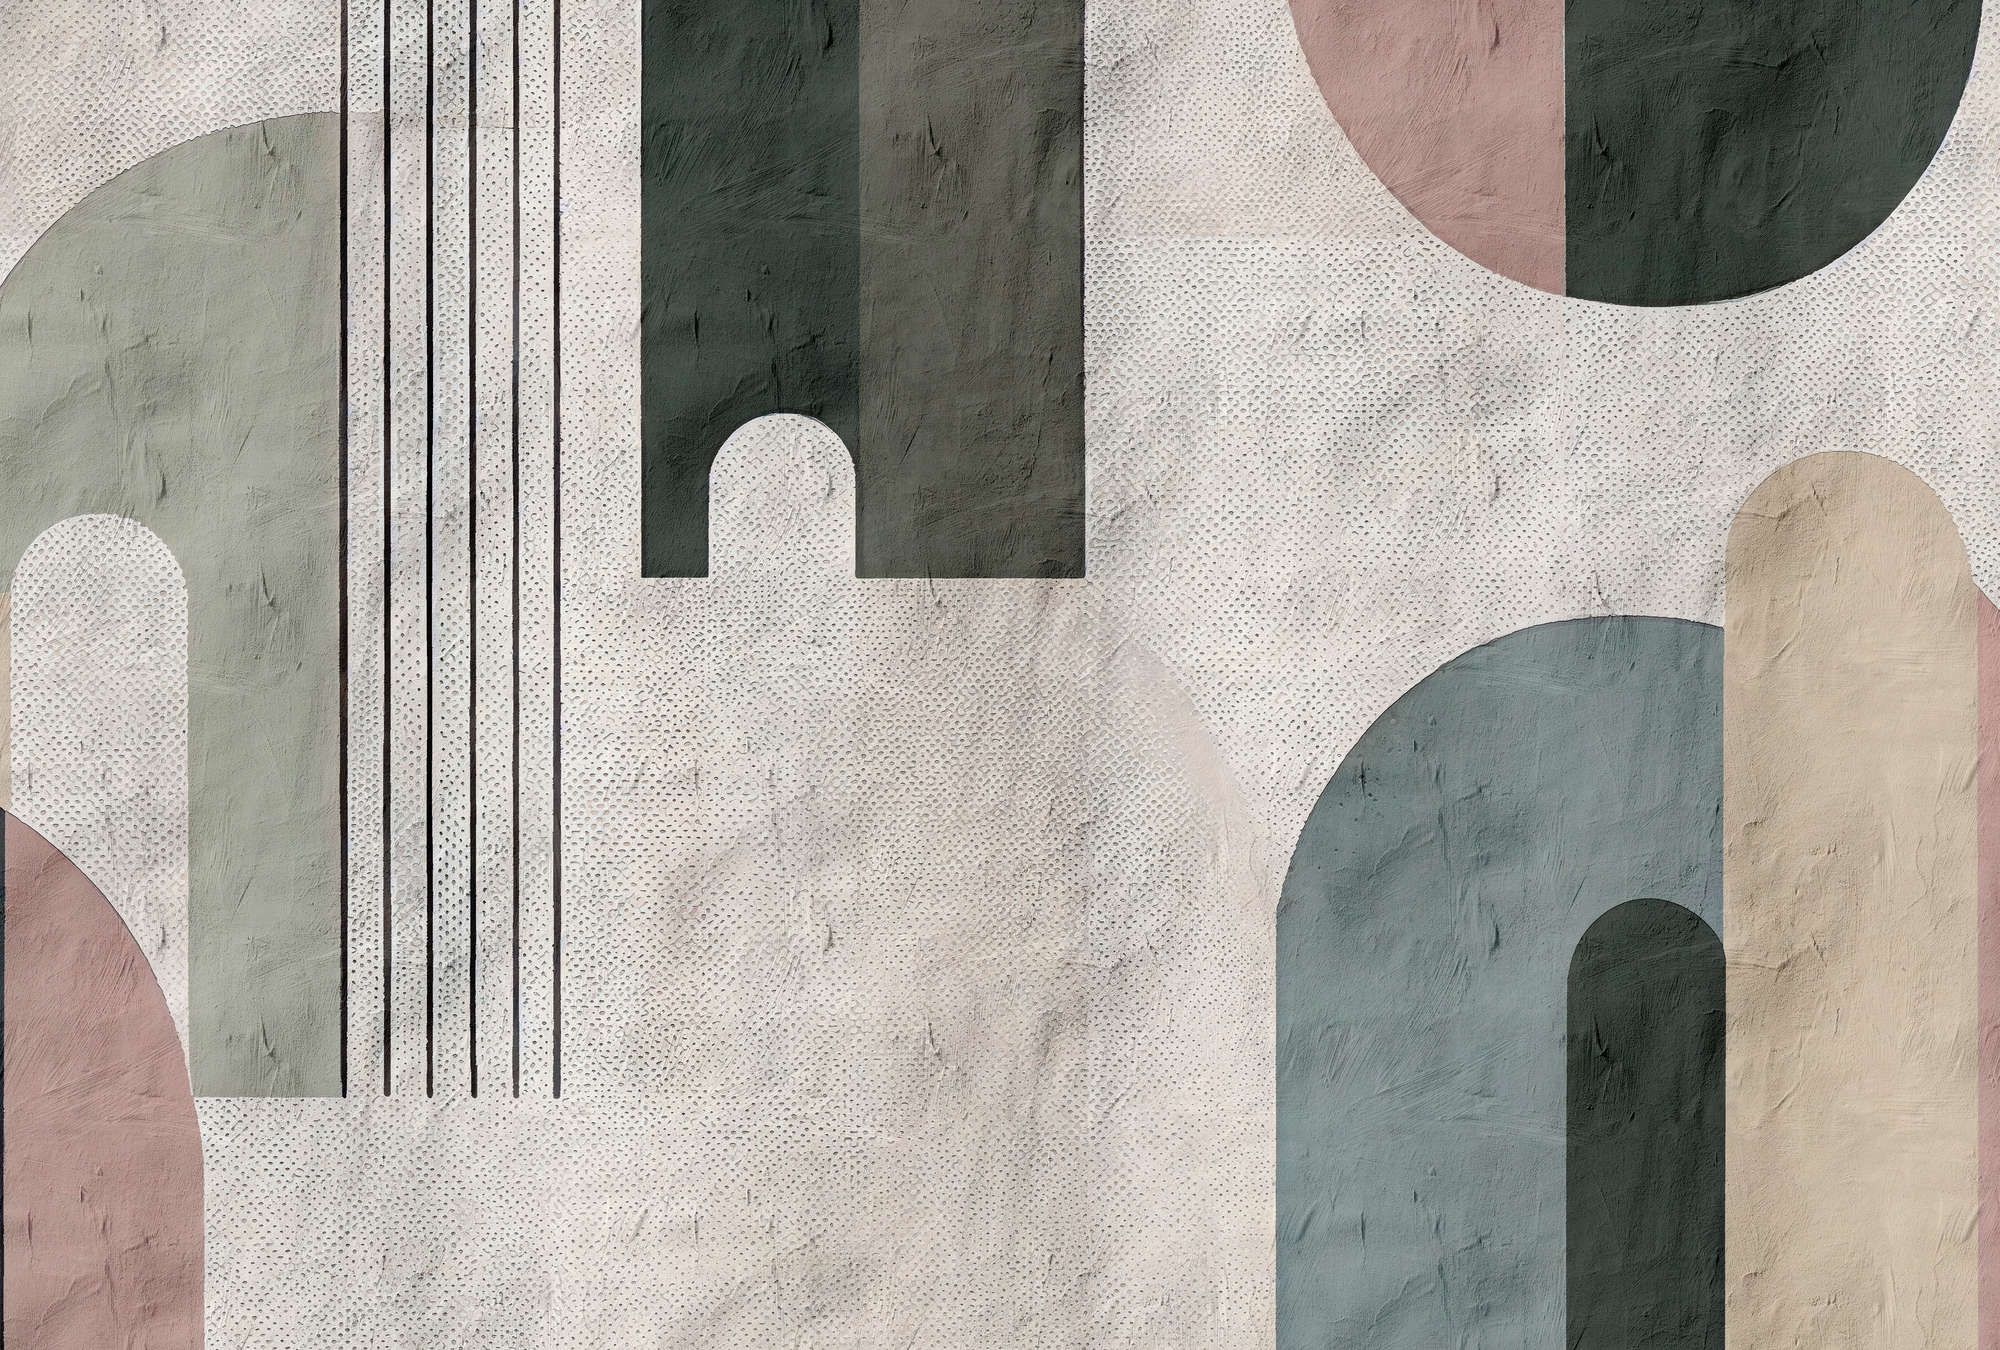             Photo wallpaper »torenta« - Graphic pattern with round arch, clay plaster texture - Matt, smooth non-woven fabric
        